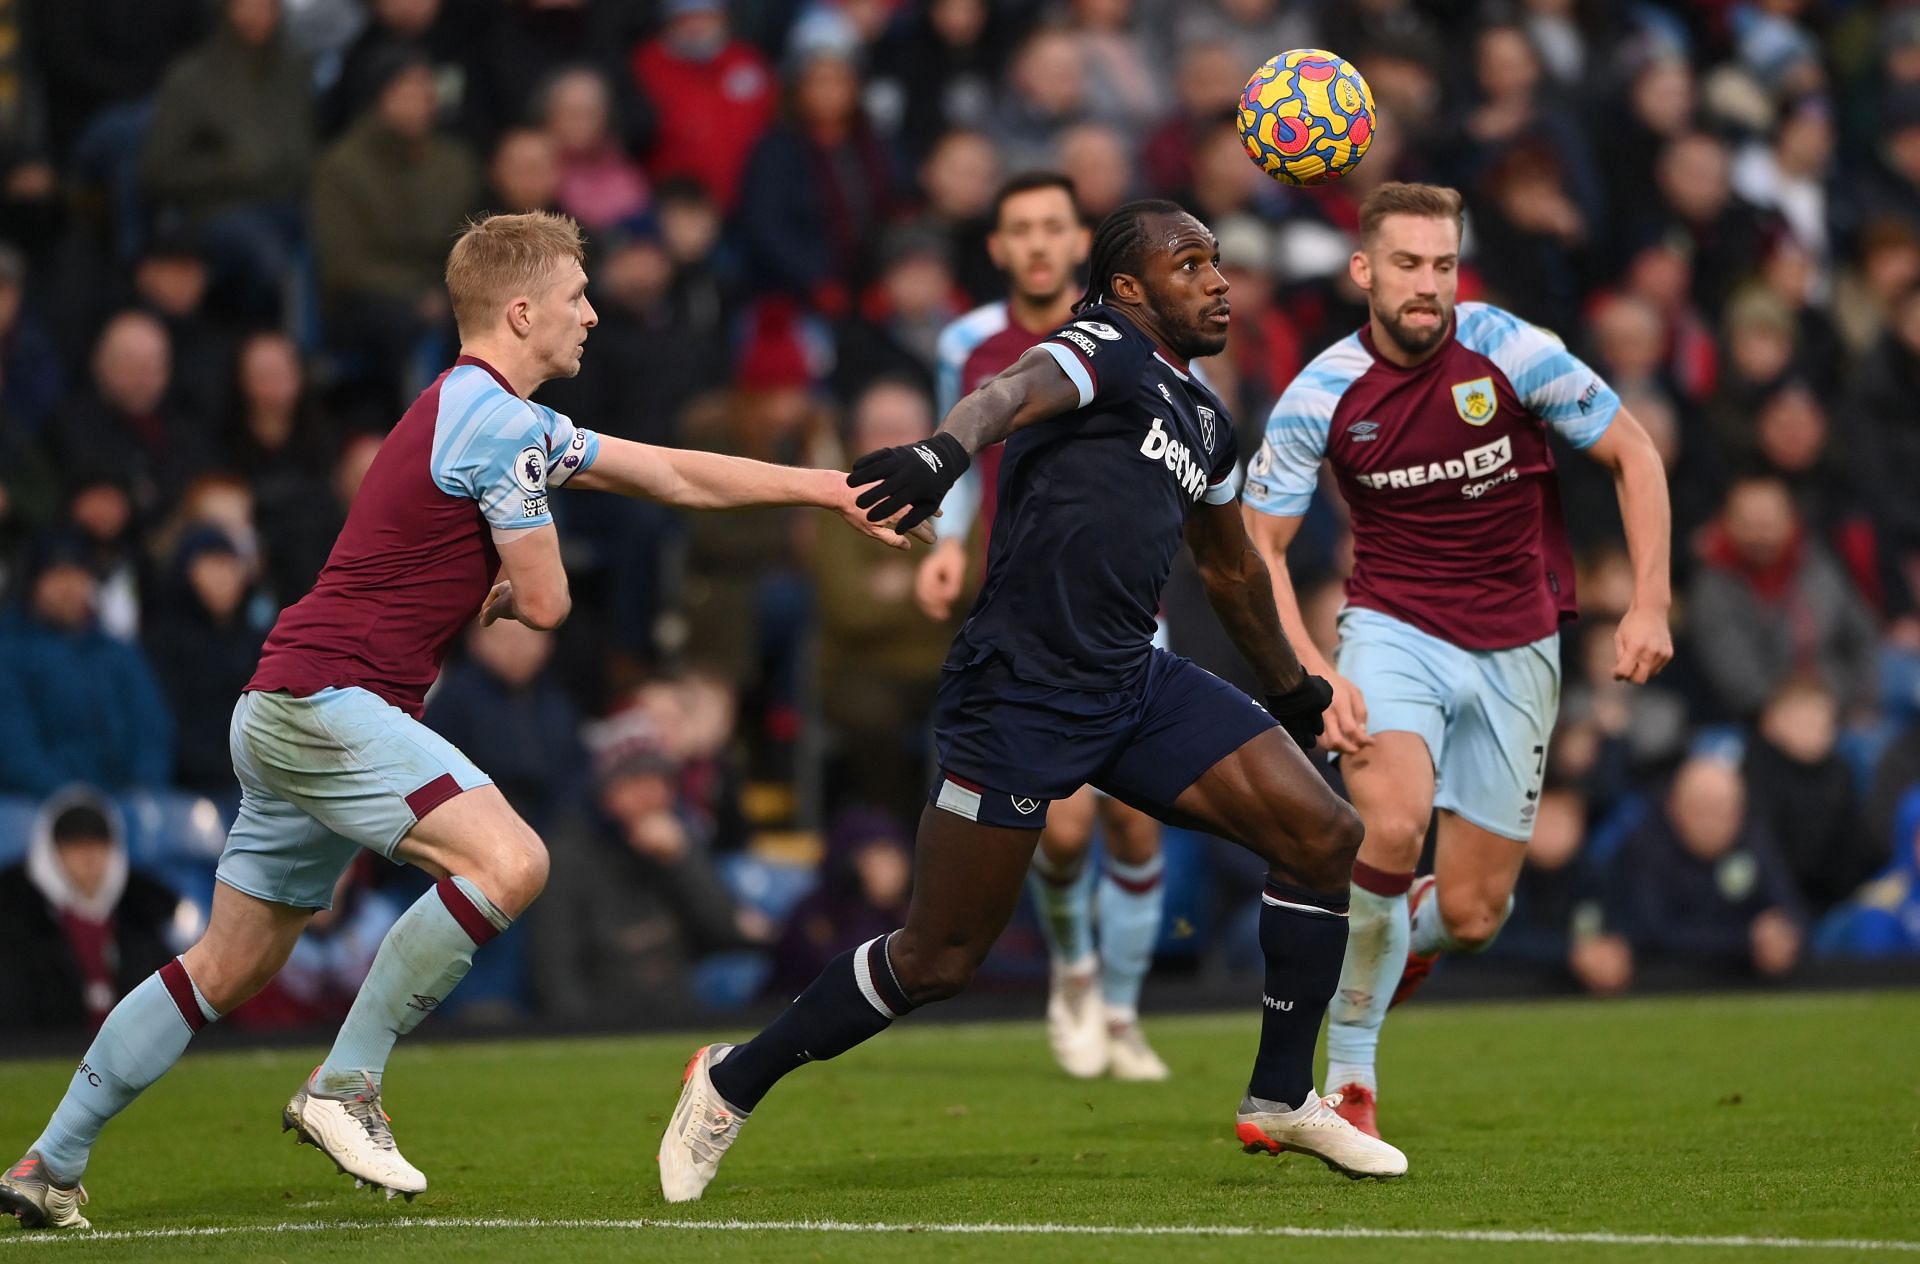 West Ham and Burnley will square off in the Premier League on Sunday.